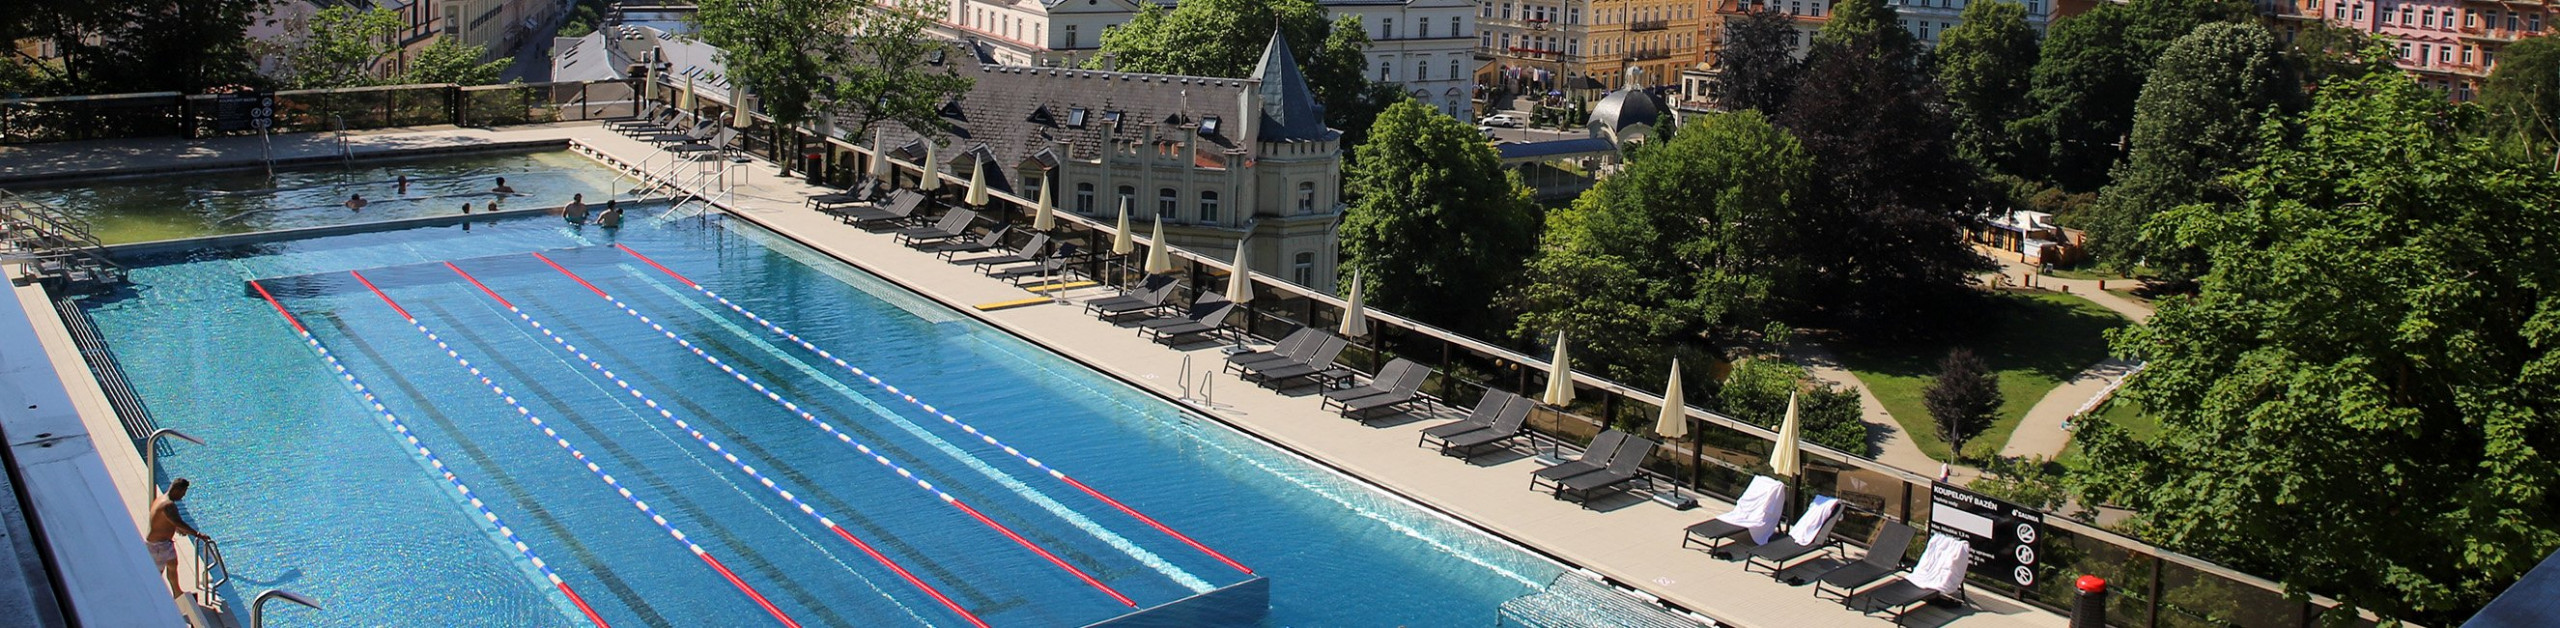 Karlovy Vary - Spa Hotel Thermal banner picture